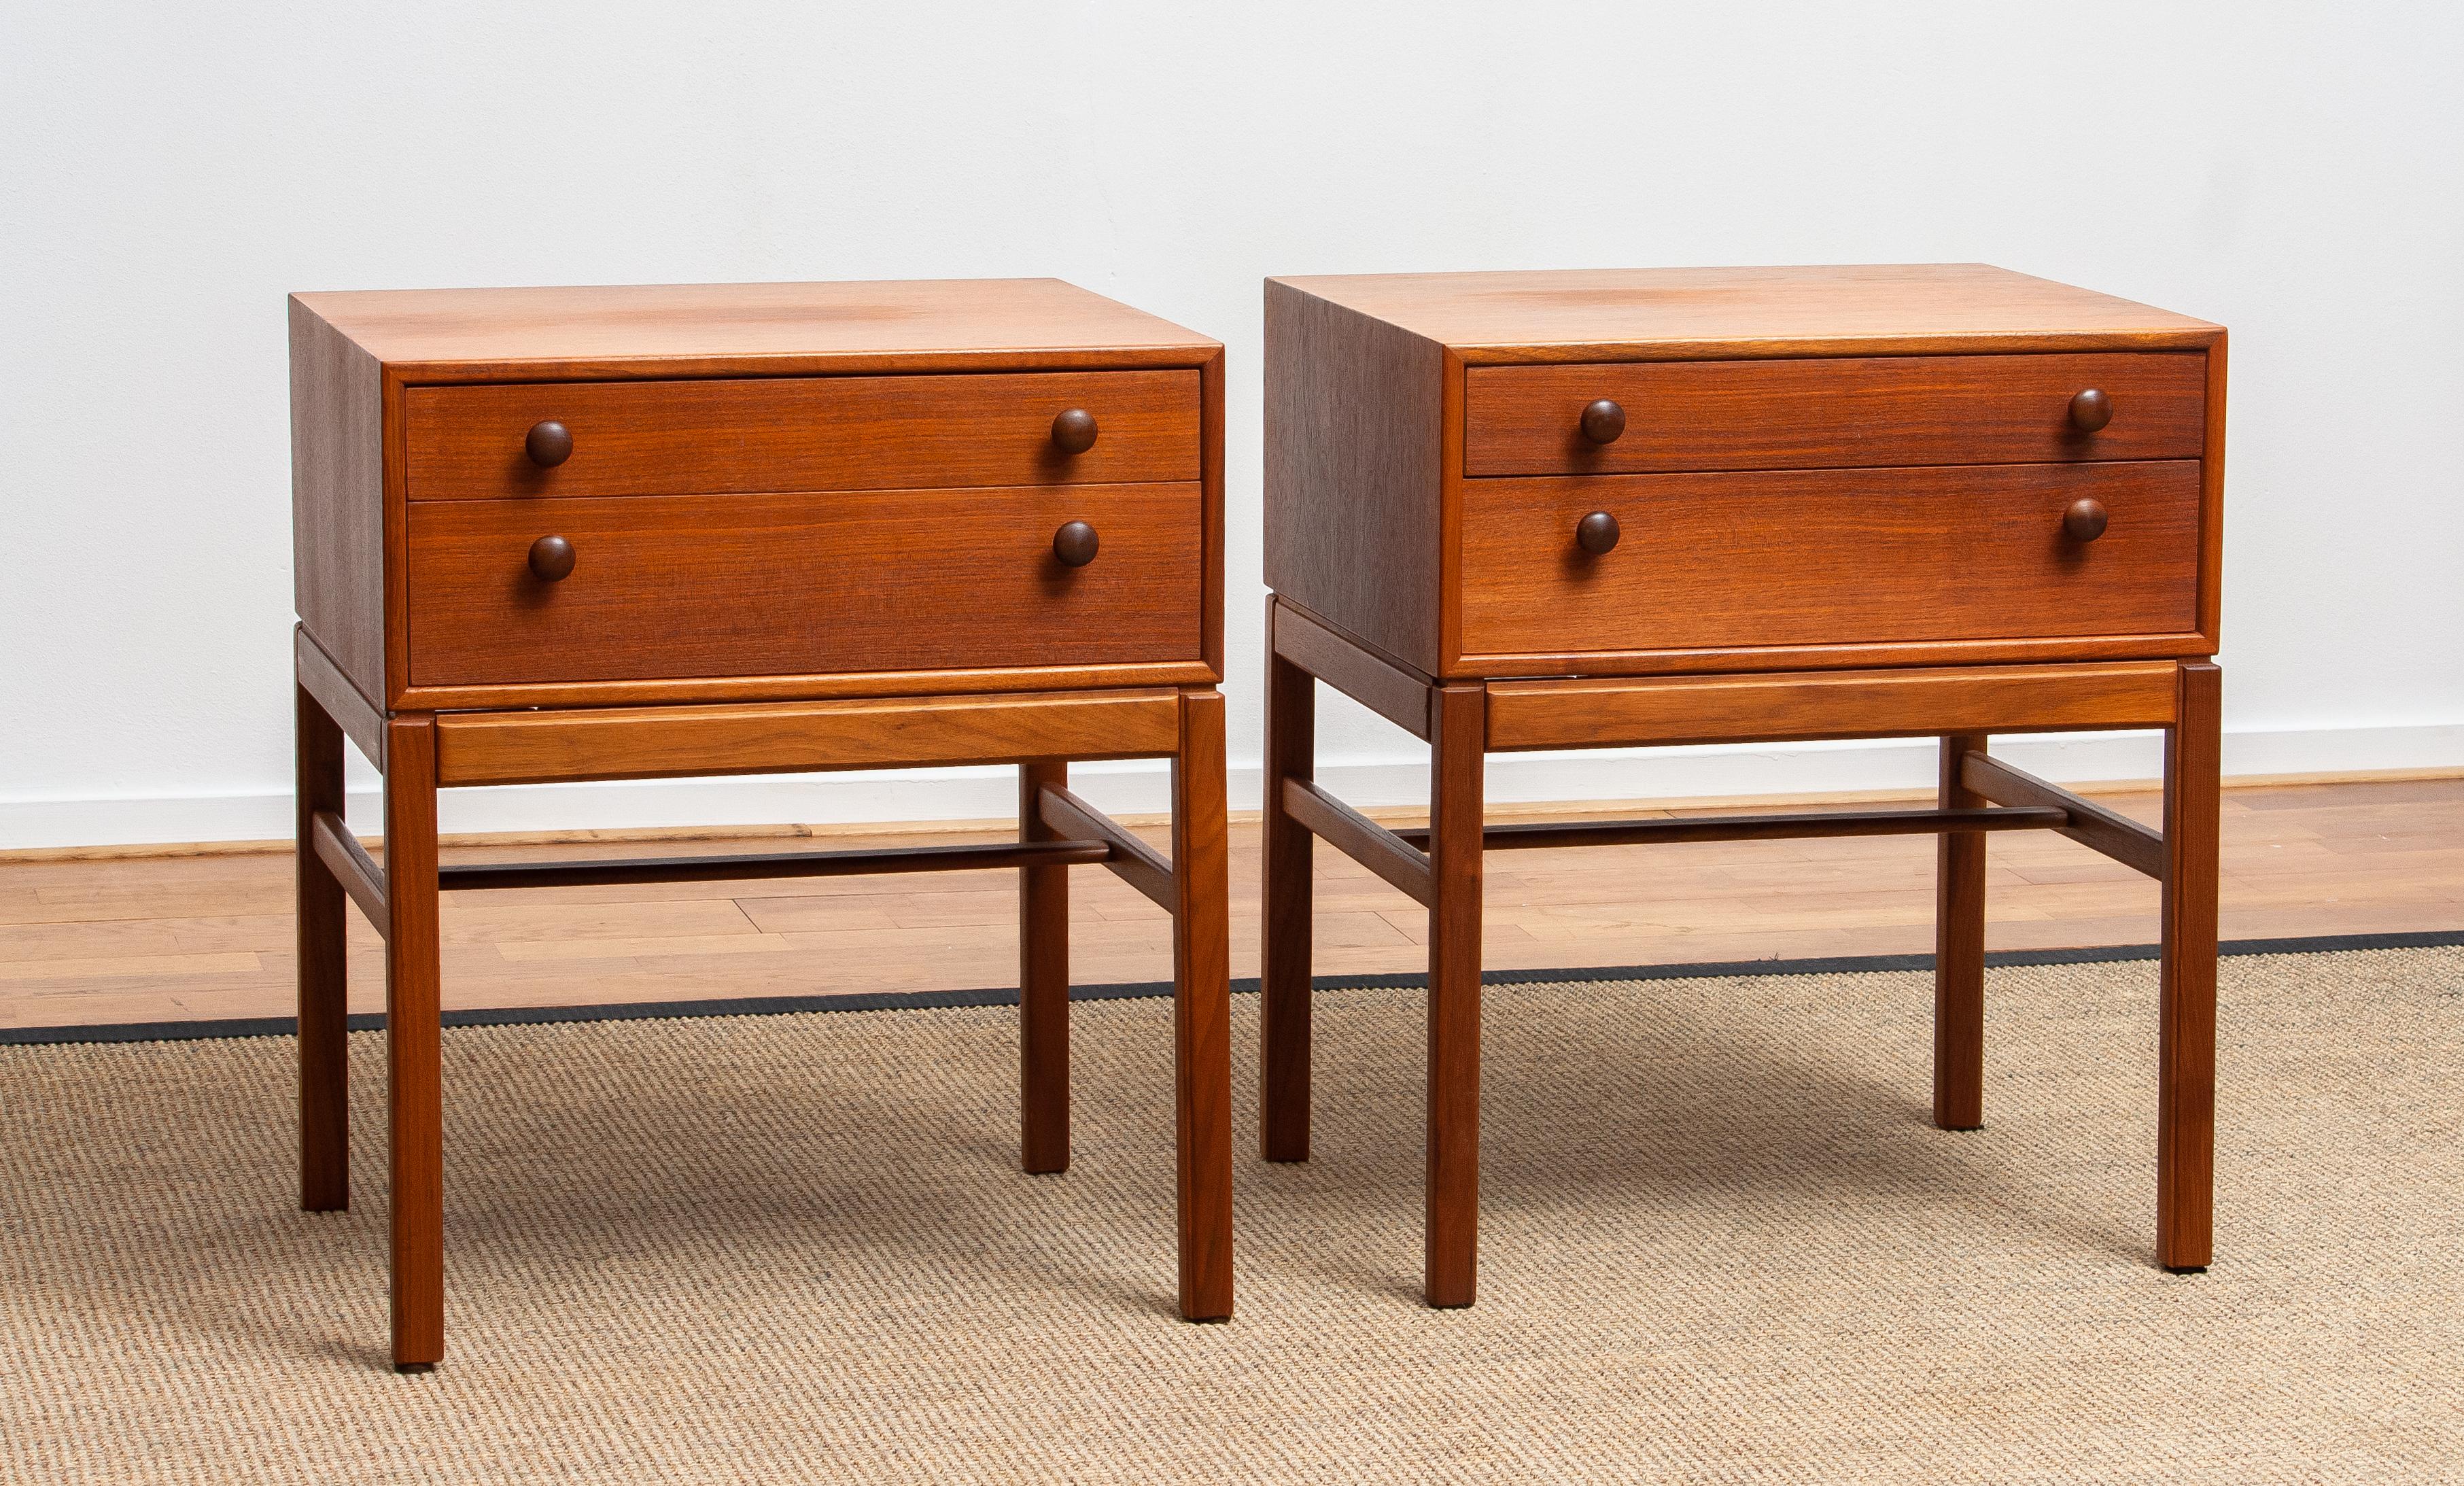 Beautiful set of three teak side tables - sideboard designed by Sven Engström & Gunnar Myrstrand for Tingström Möbelfabriks, Sweden.
They are from the flexible 'Casino' collection.
You can lift the four tops with the two drawers from the